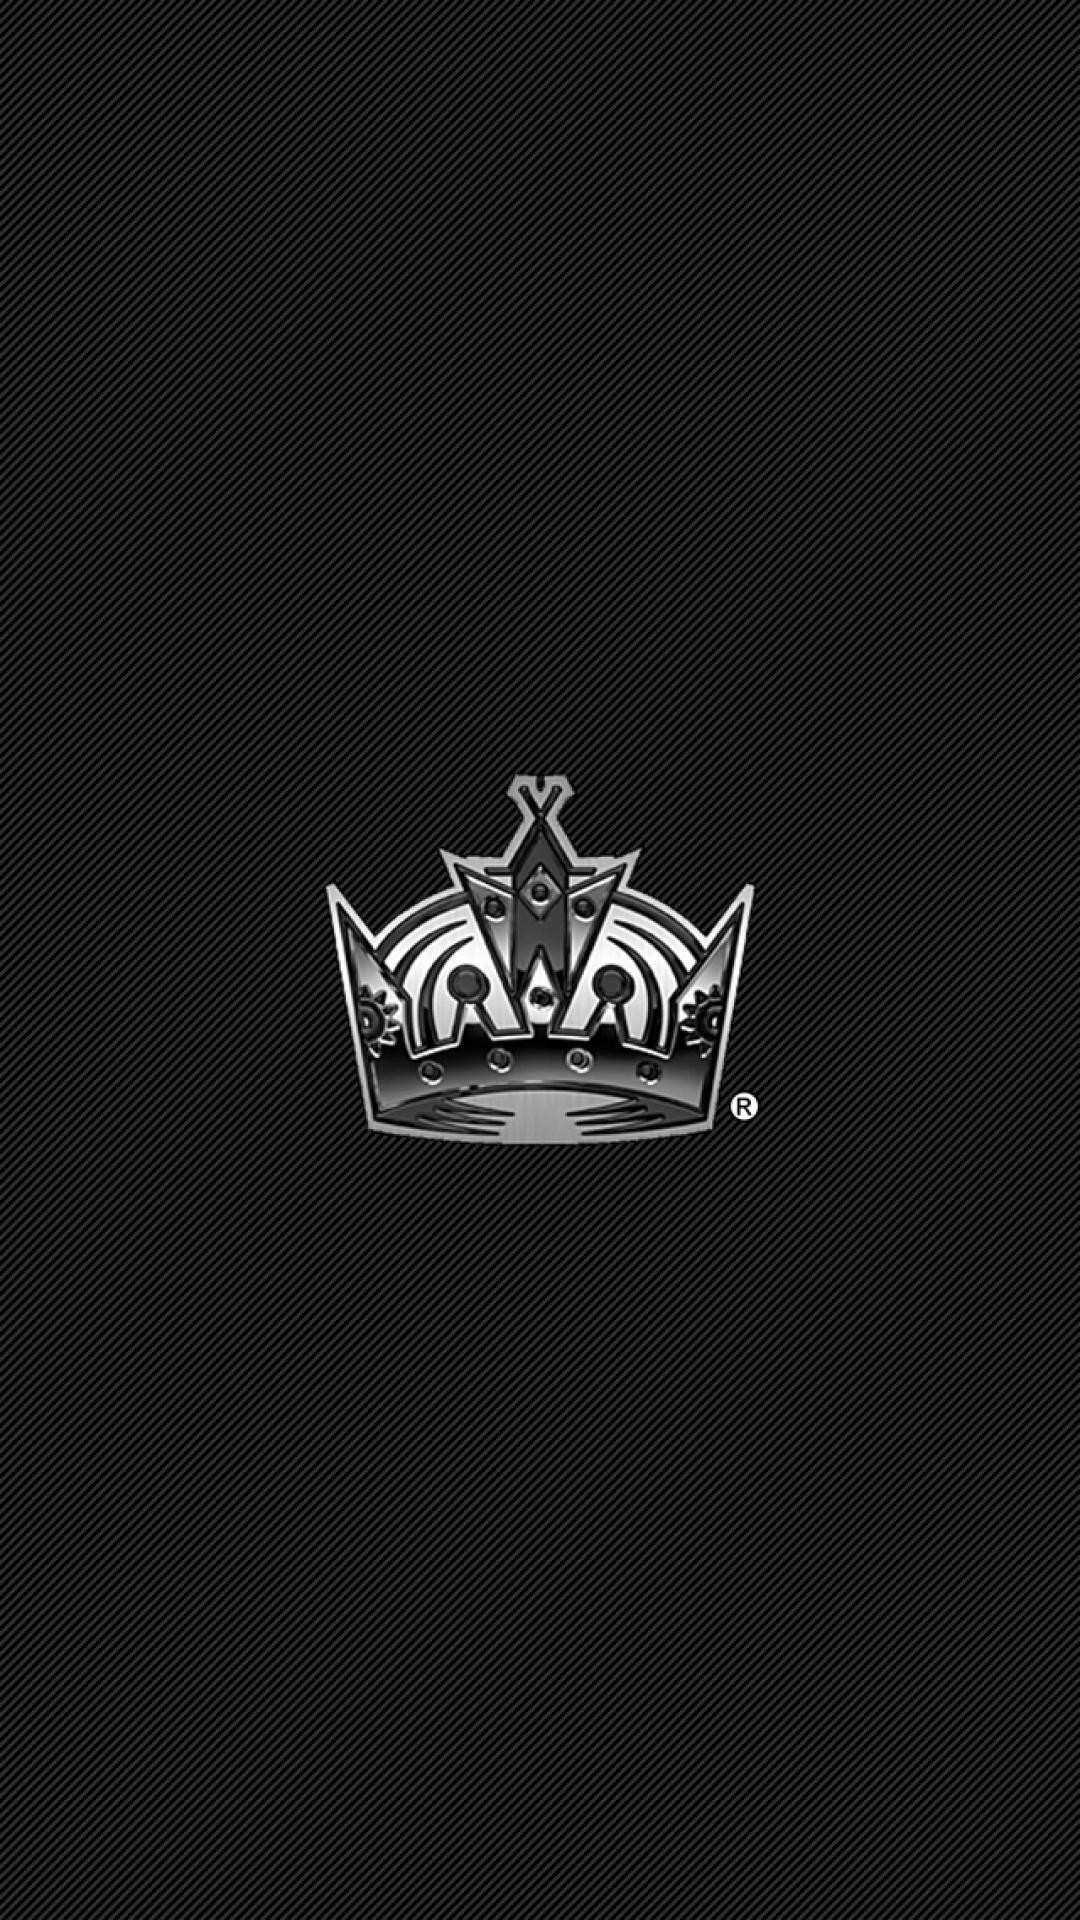 1080x1920 48 La Kings Wallpapers Hd And Photos View. Iphone 6 Wallpaper